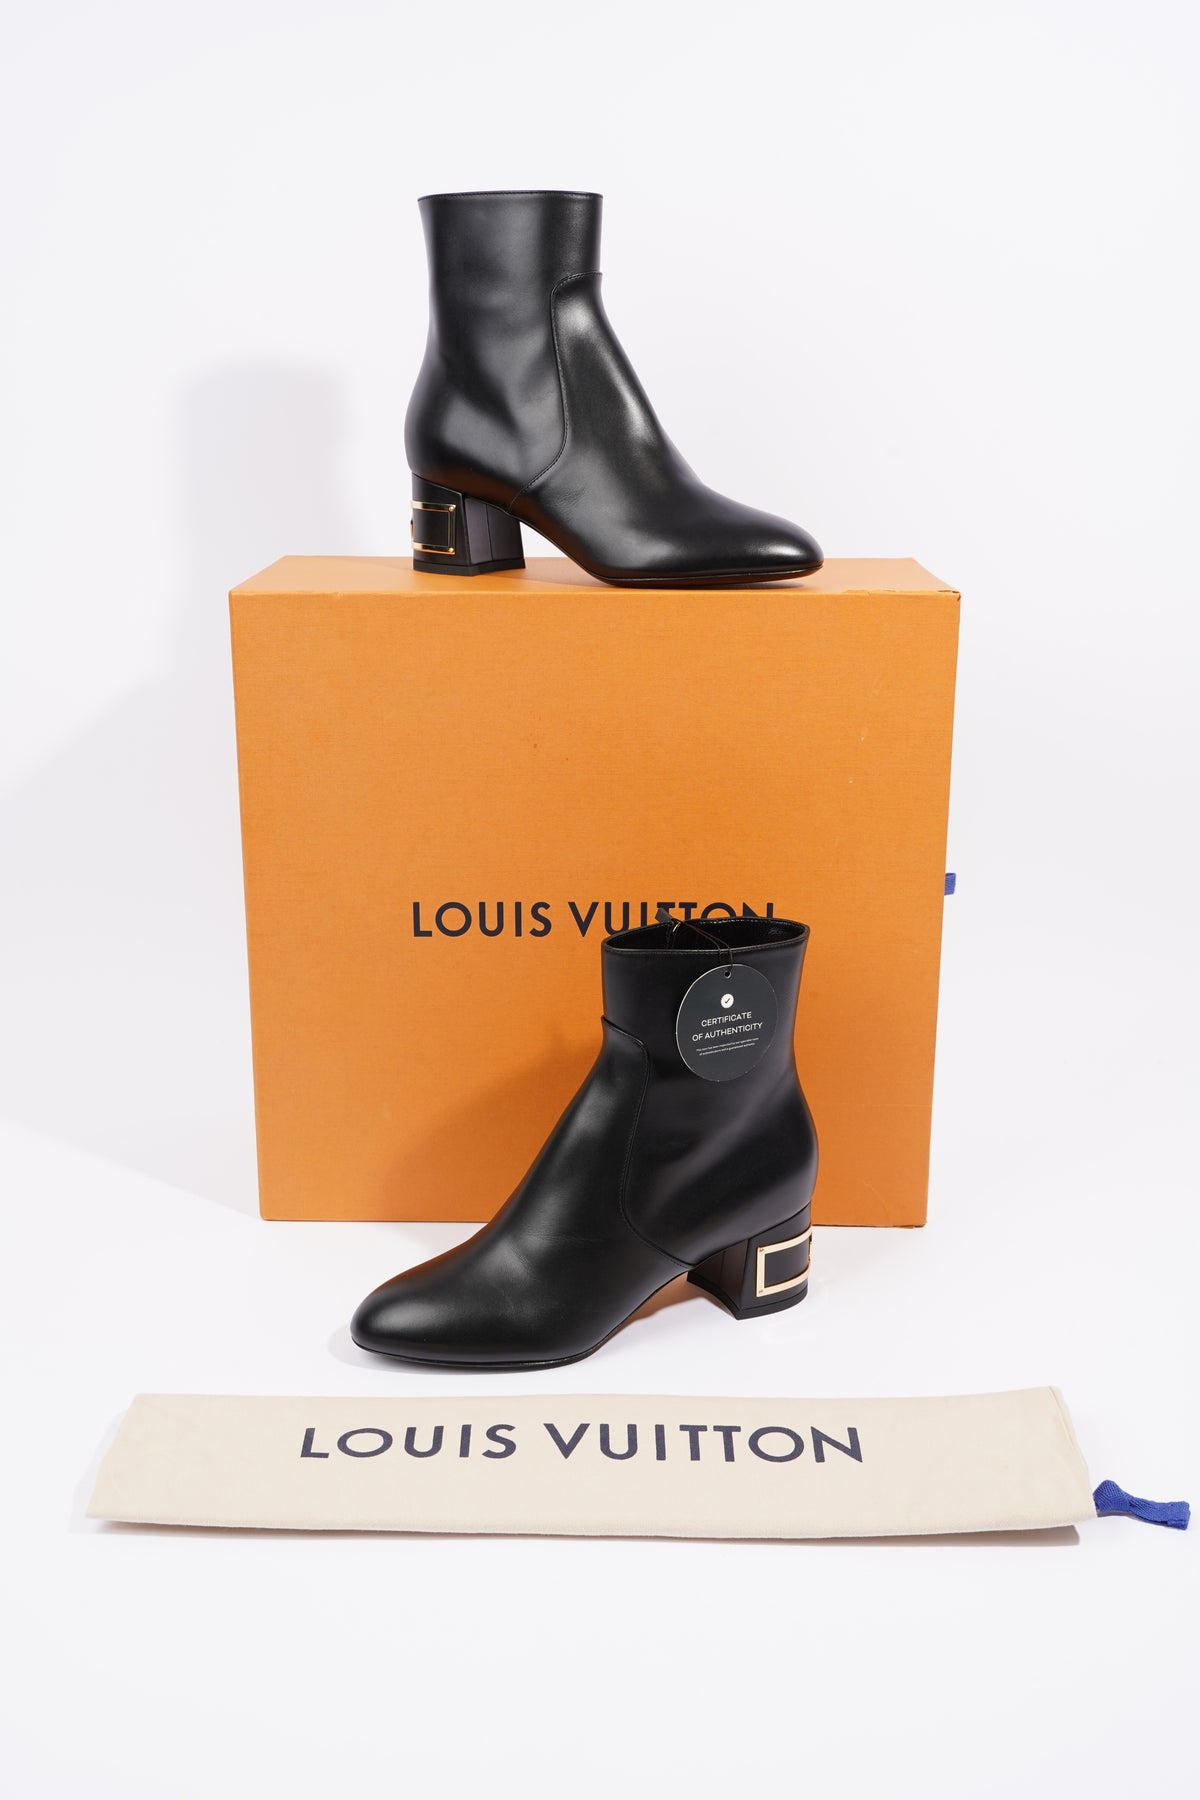 Authentic Louis Vuitton Patent Leather Ankle Boots 39.5